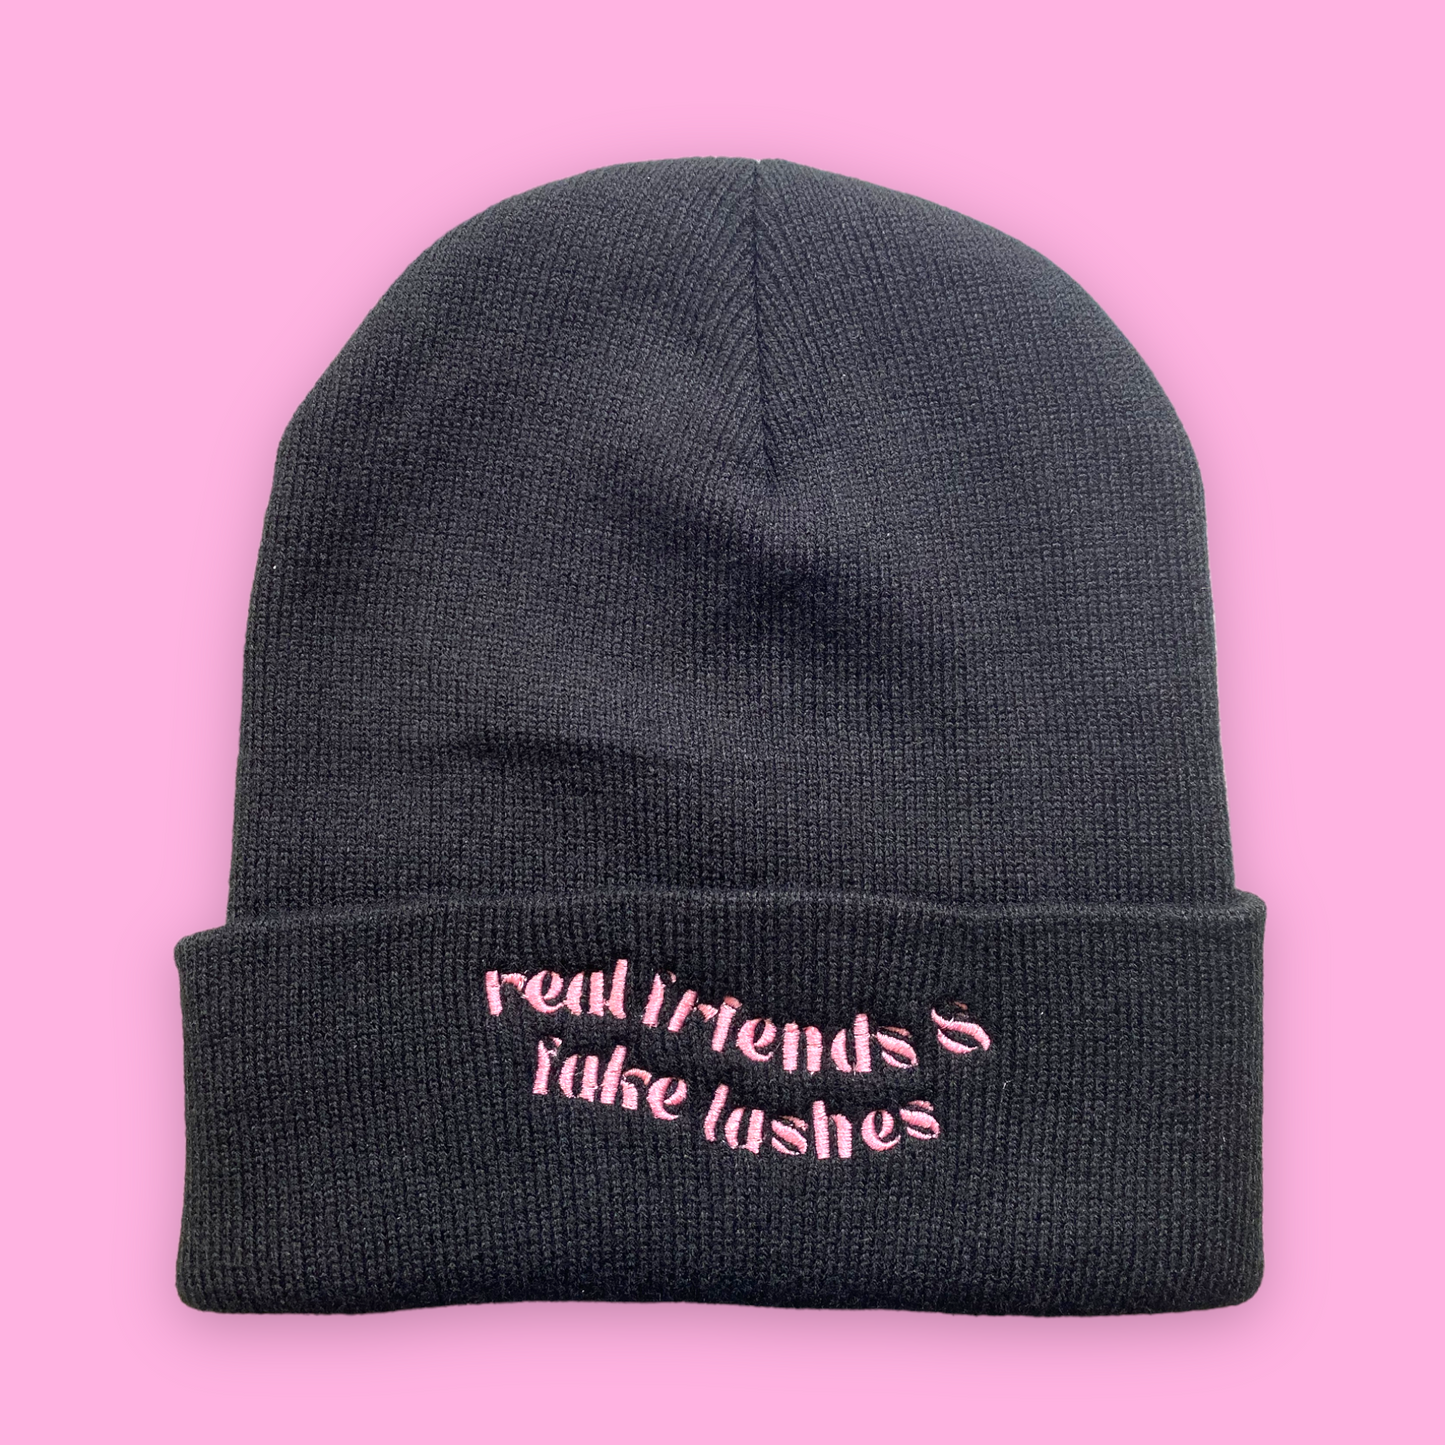 BEANIE-real friends & fake lashes